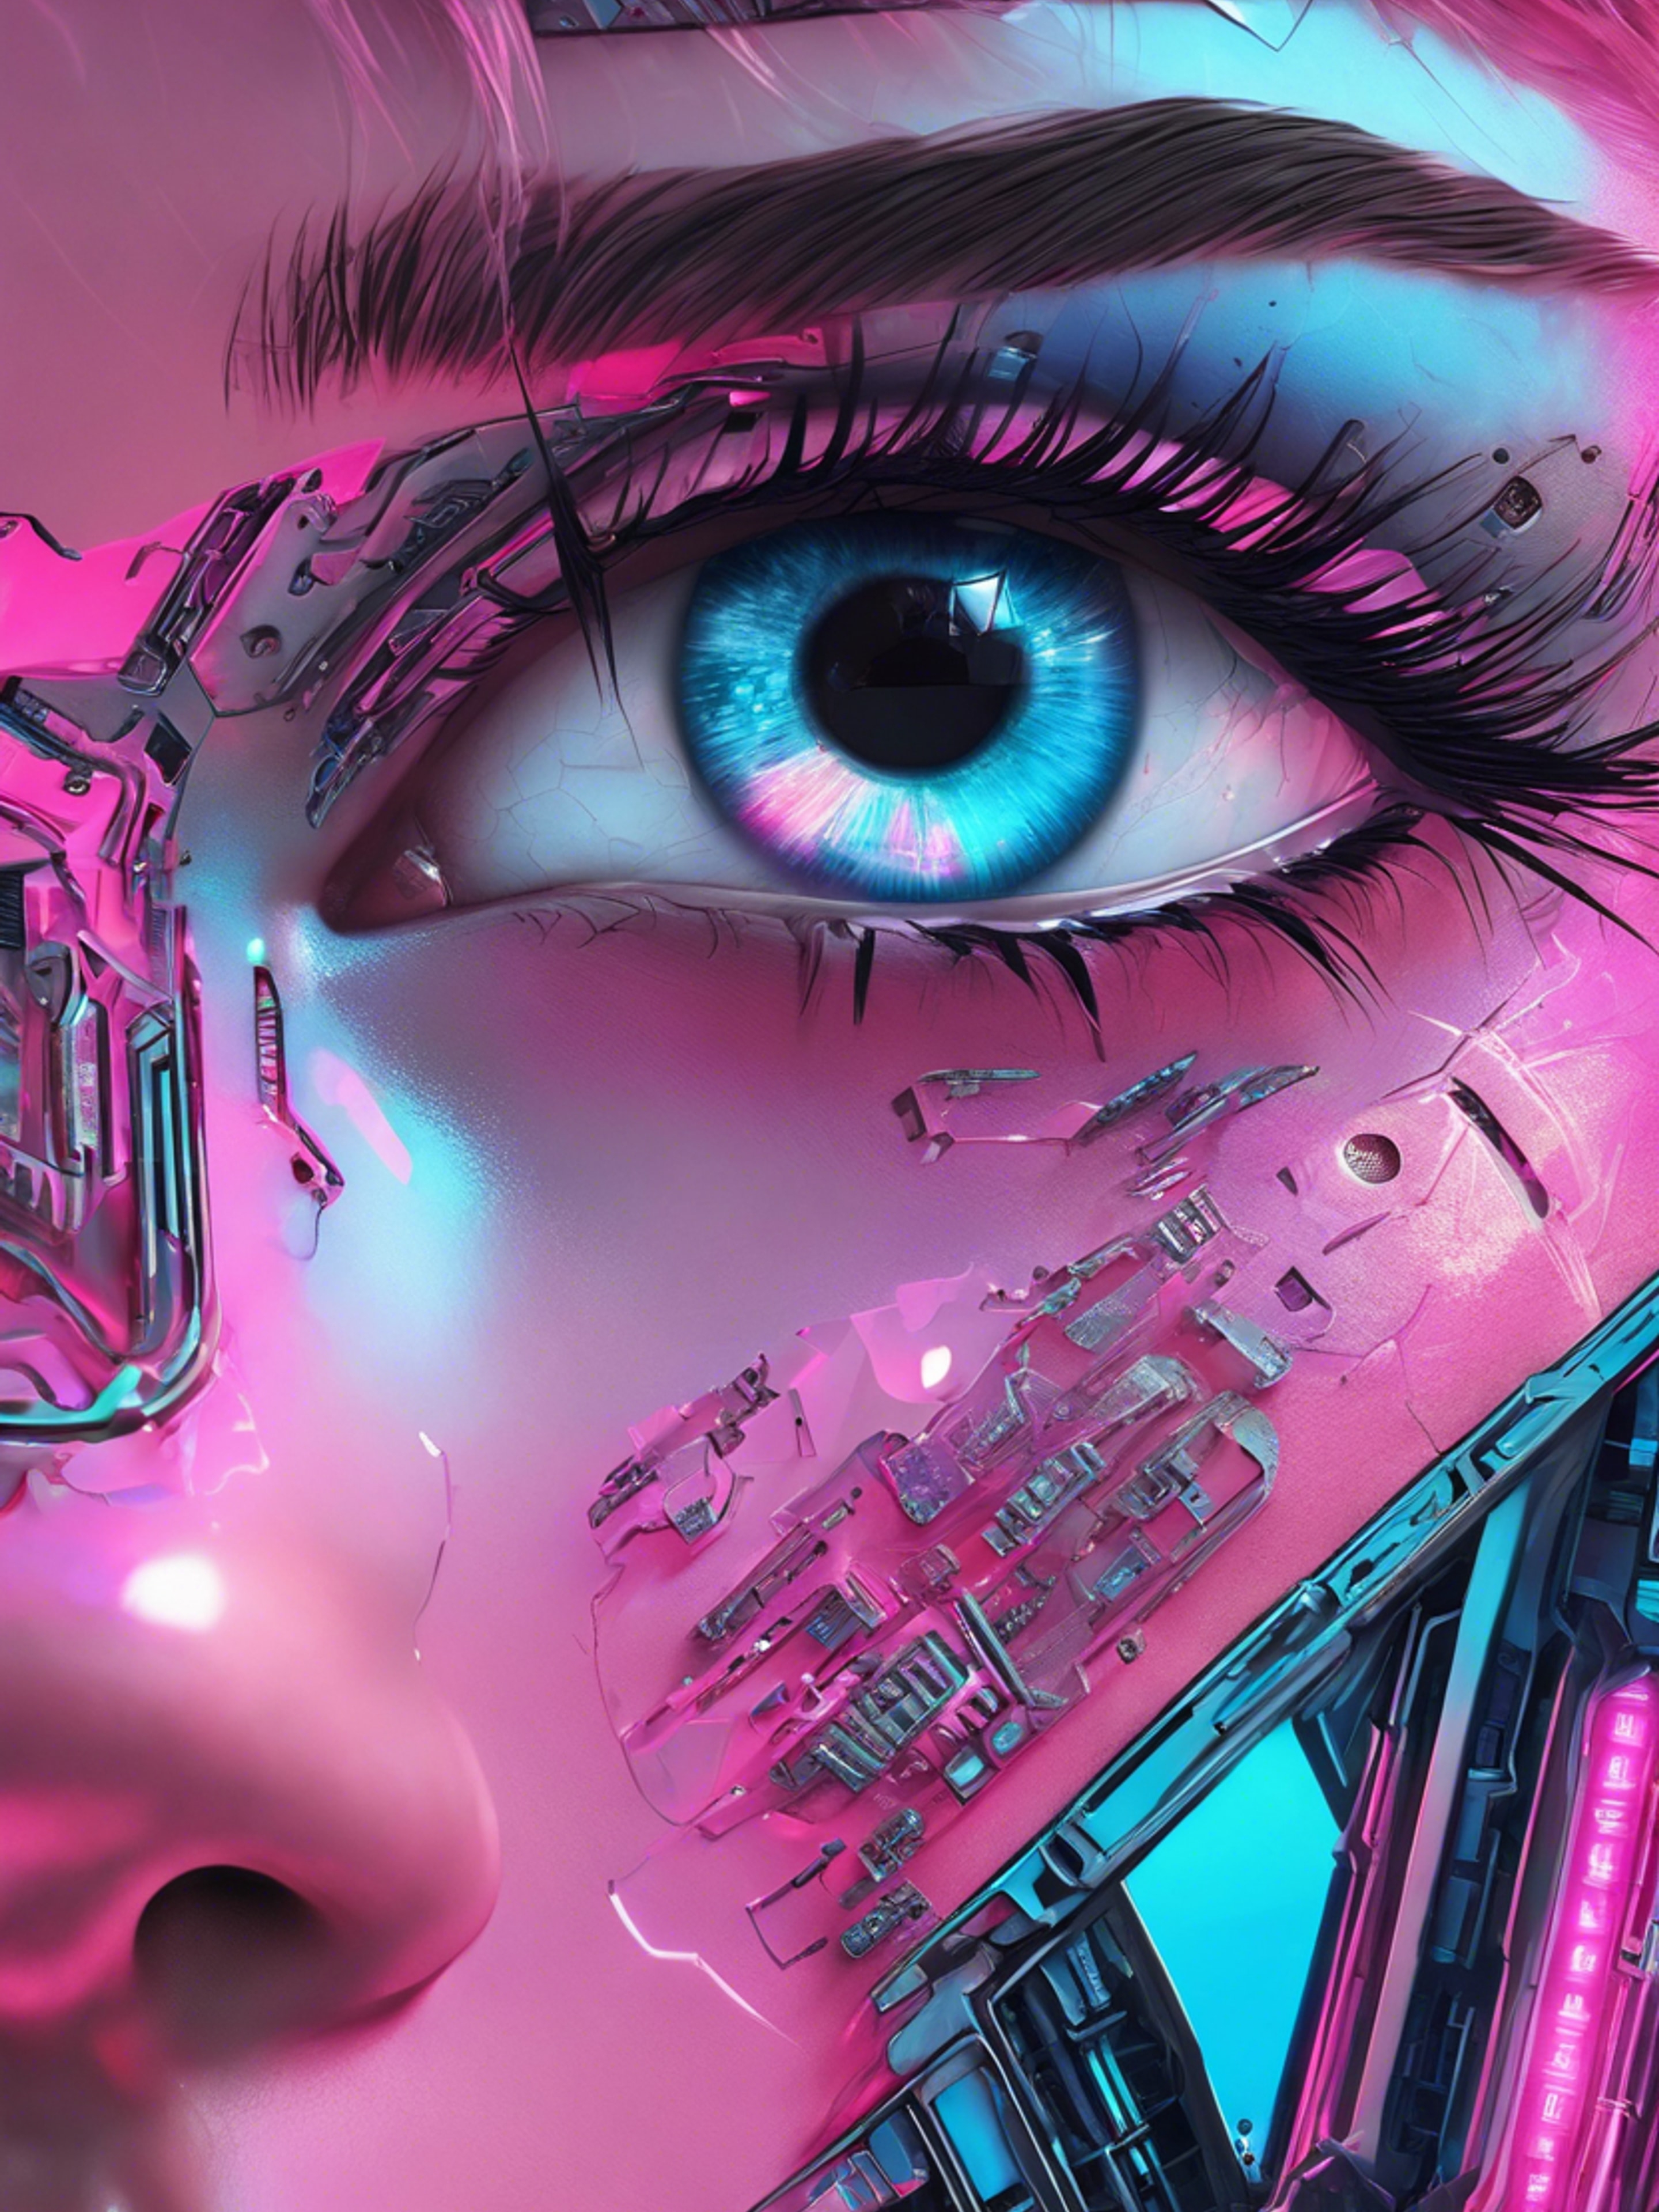 A close-up of a cyberpunk girl's eye, reflecting pink and blue city lights. Обои[805009a14d1a4c10afac]